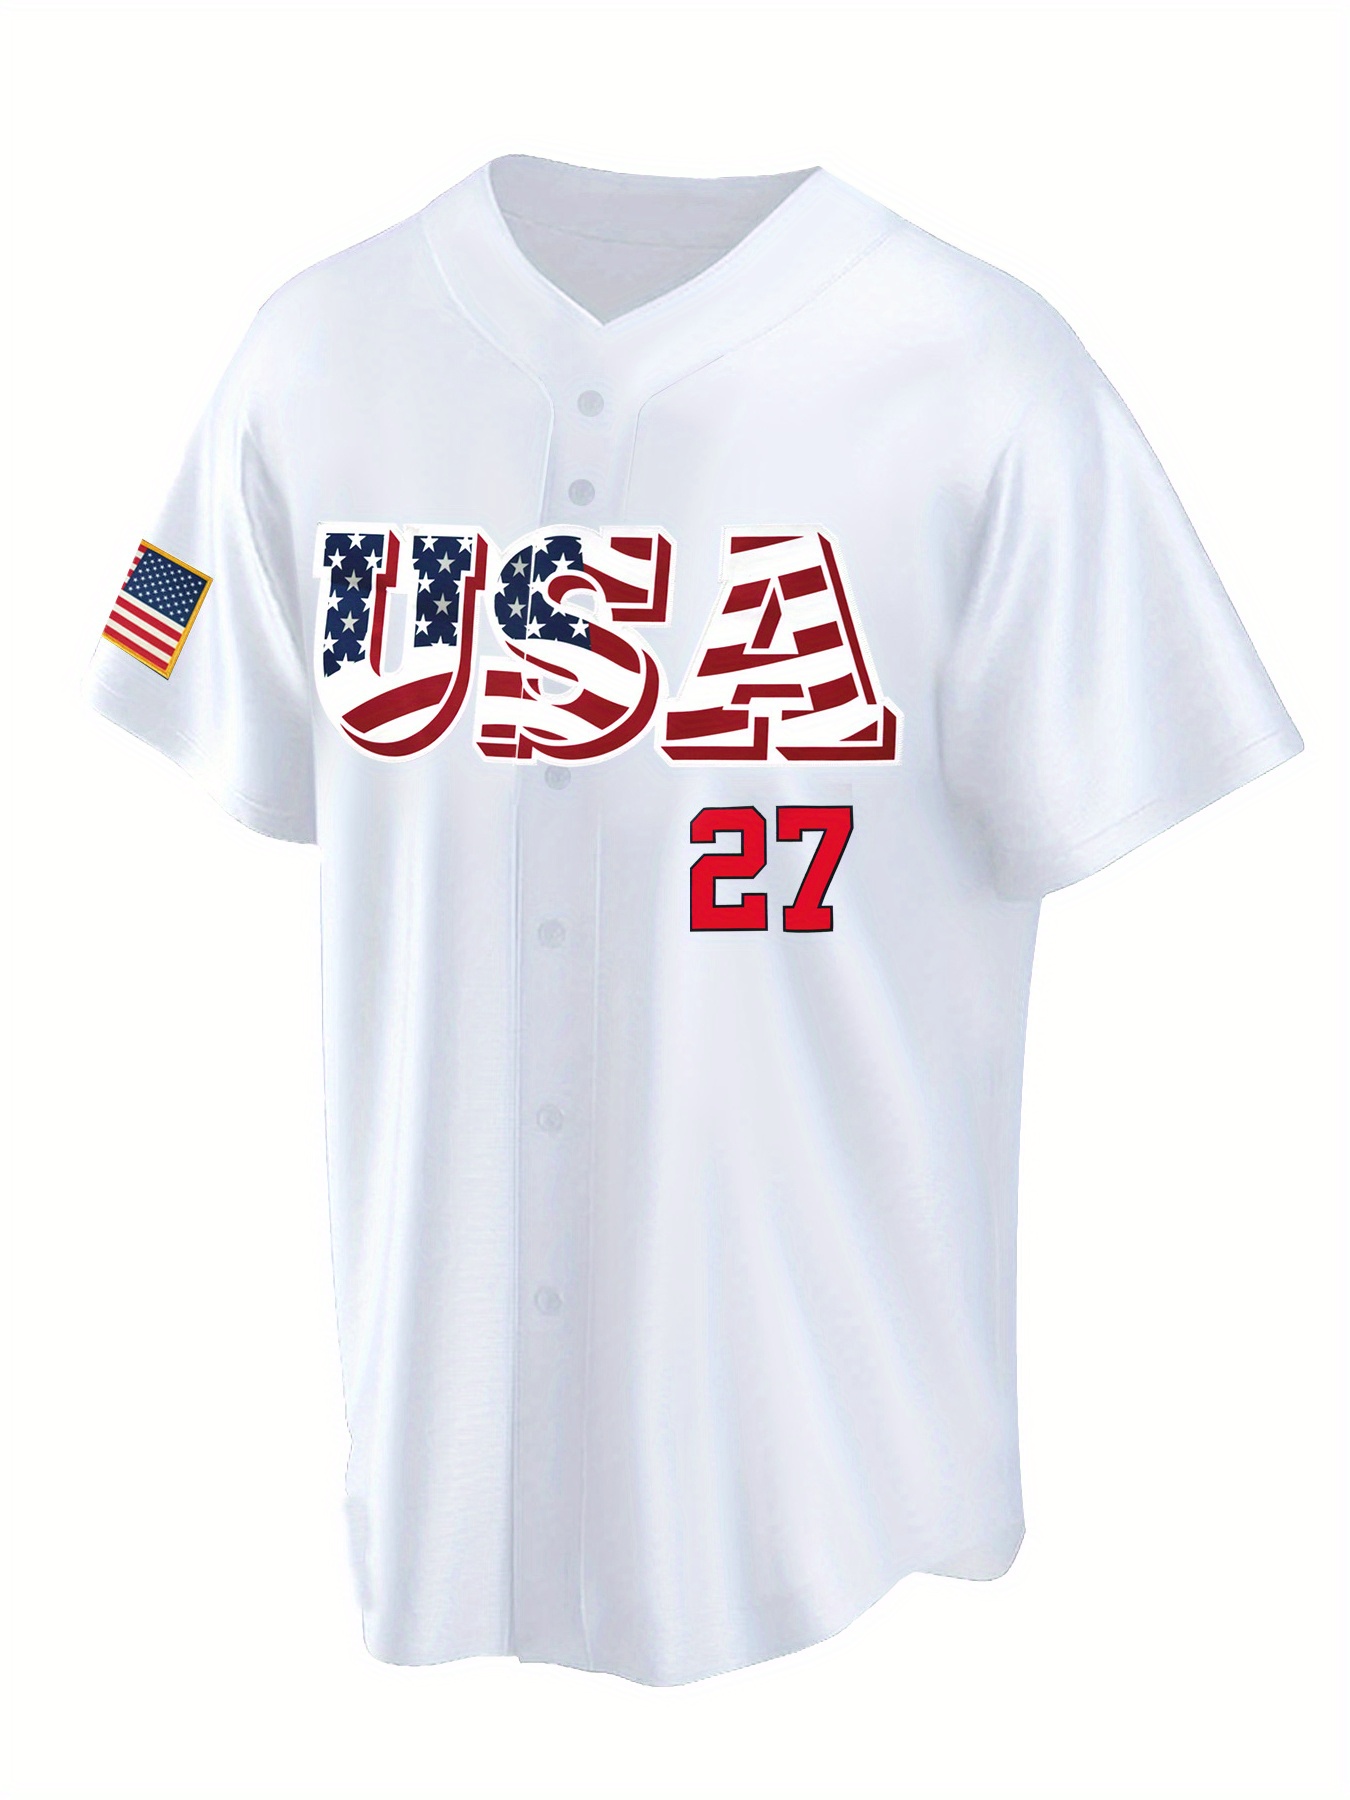 Men's Number 18 Baseball Jersey, Retro Classic Baseball Shirt, Breathable Embroidery Button Up Sports Uniform for Training Competition Party,Temu